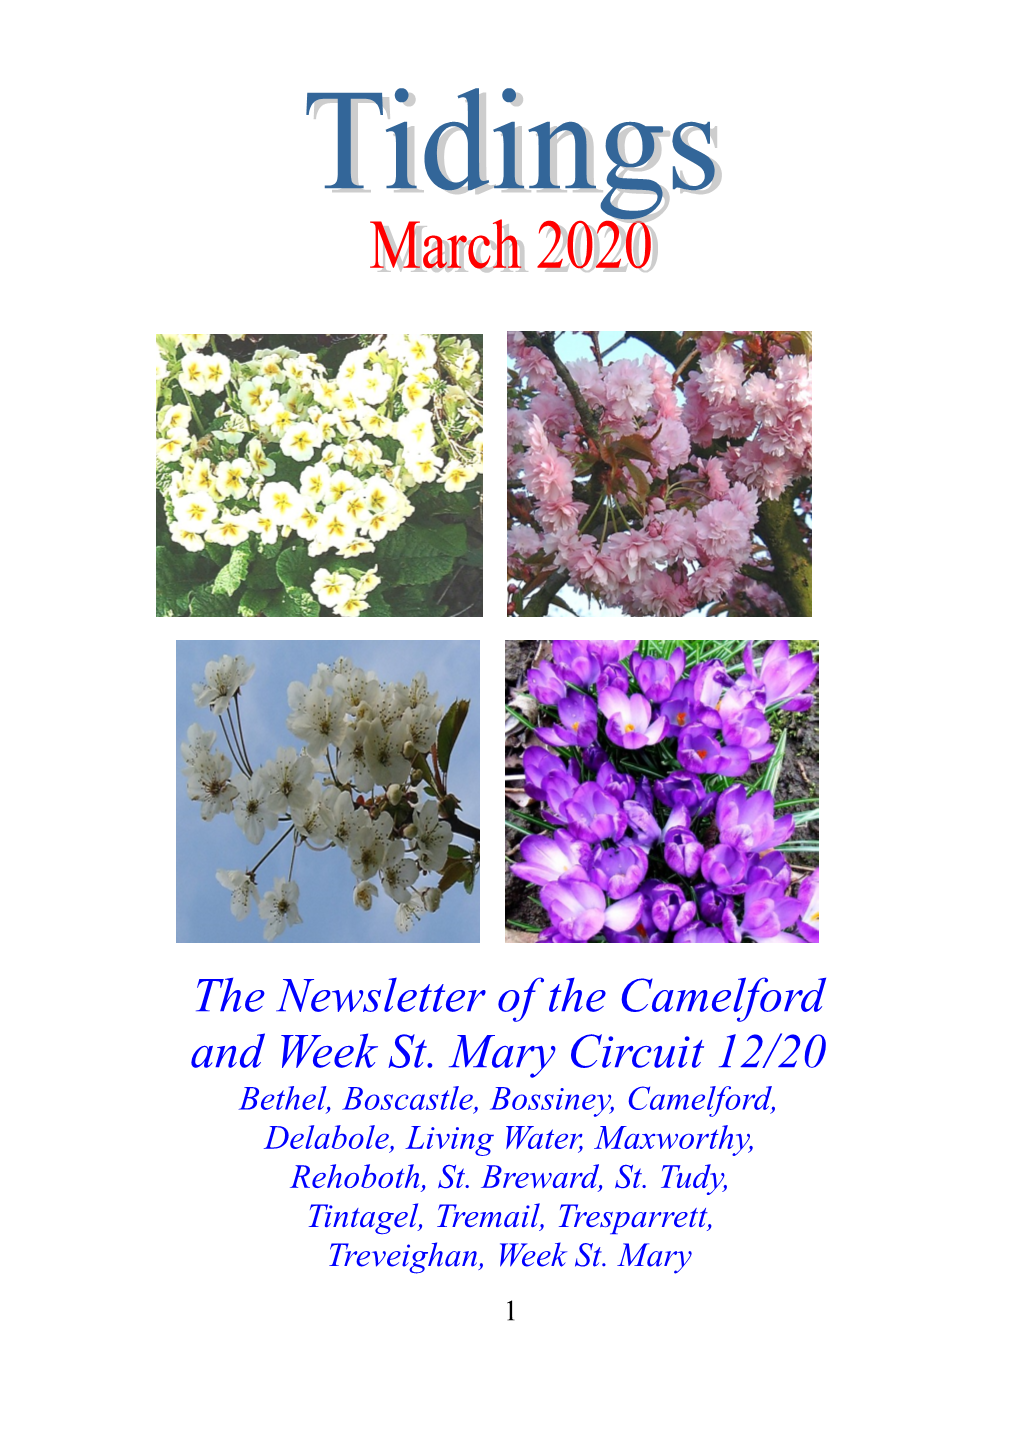 The Newsletter of the Camelford and Week St. Mary Circuit 12/20 Bethel, Boscastle, Bossiney, Camelford, Delabole, Living Water, Maxworthy, Rehoboth, St